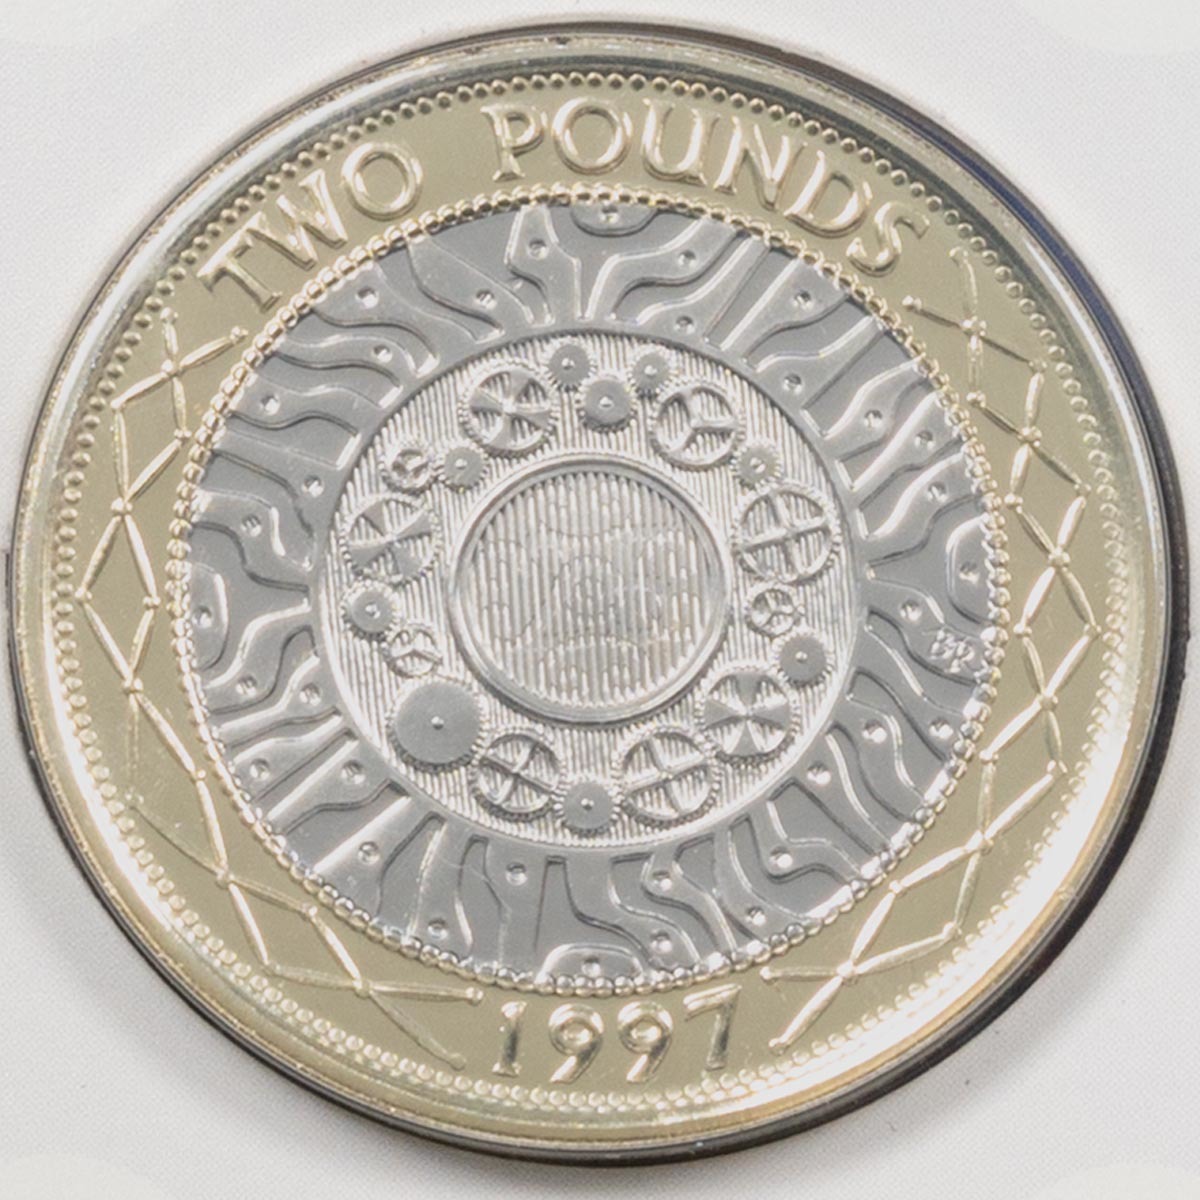 uk22s2bu-2022-twenty-five-years-of-uk-two-pound-coin-brilliant-uncirculated-edition-in-folder-001-m